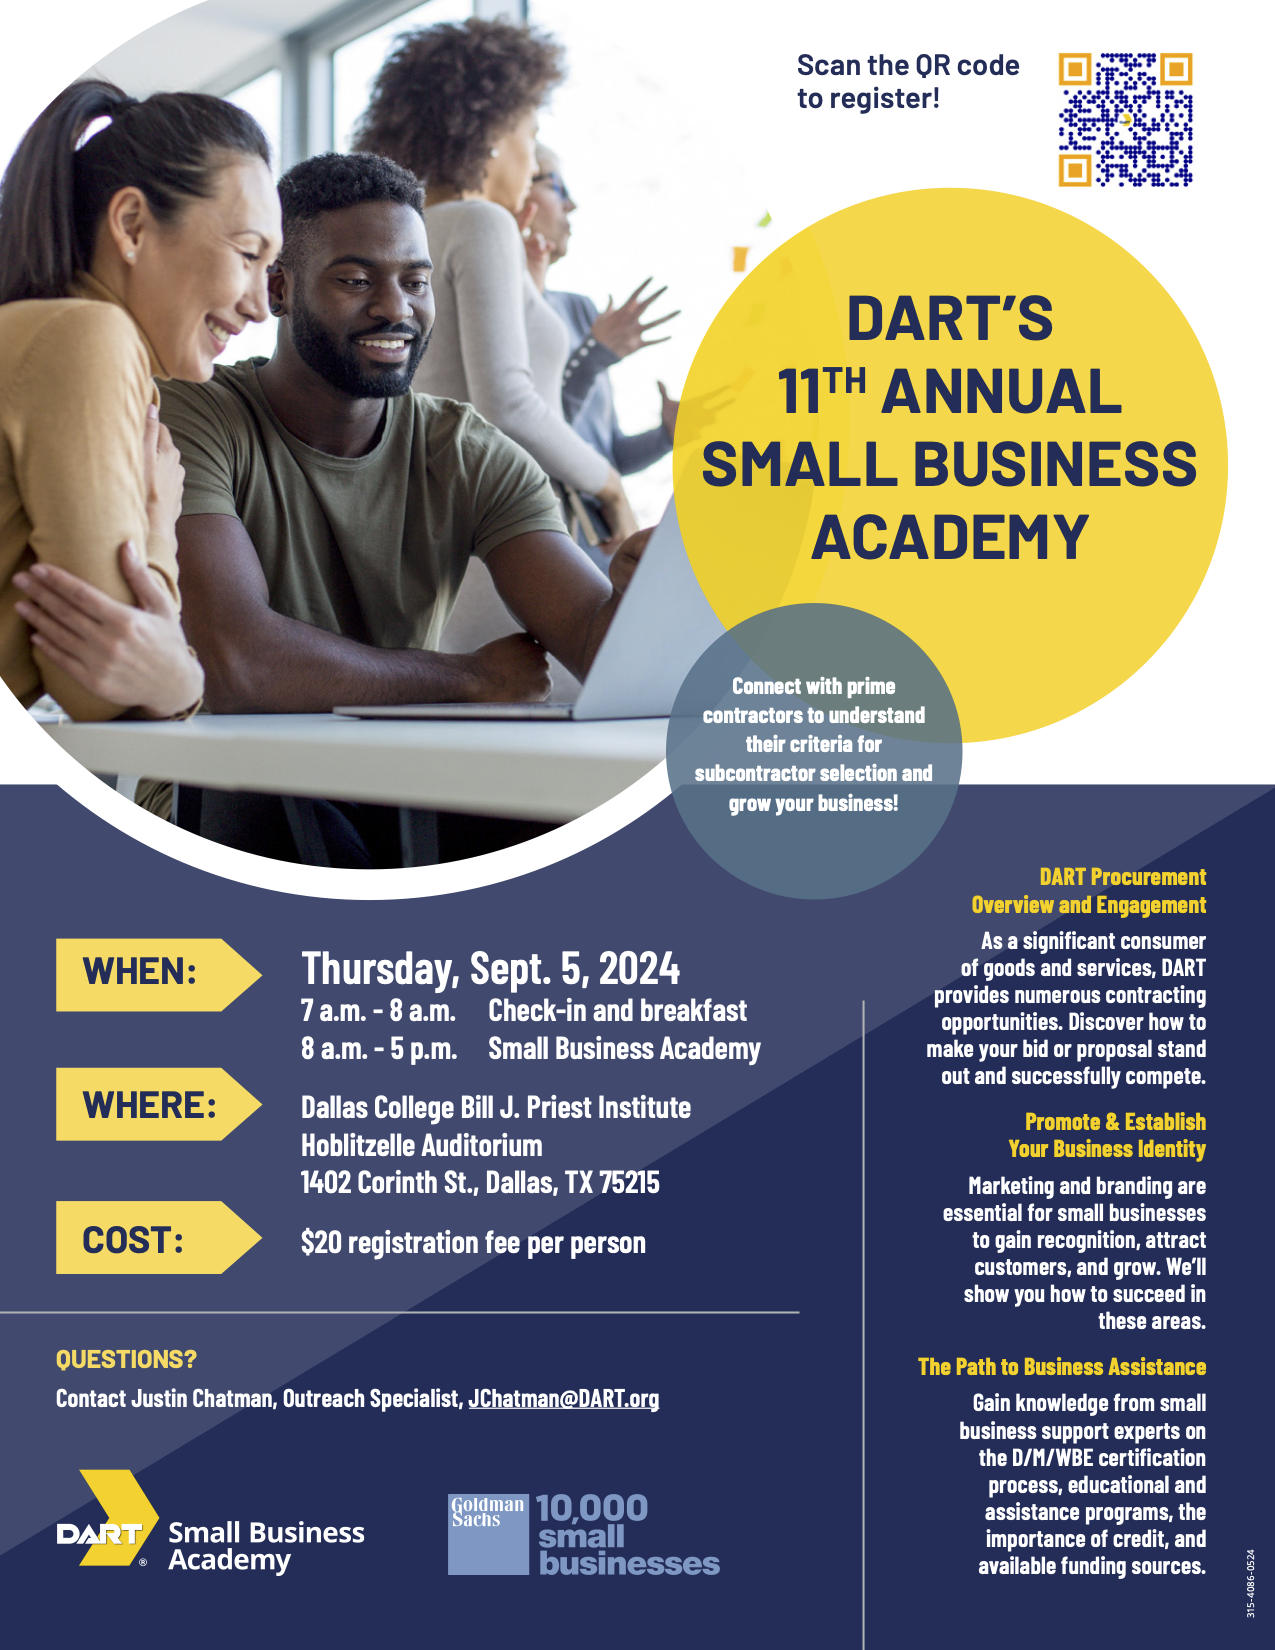 DART's 11th Annual Small Business Academy